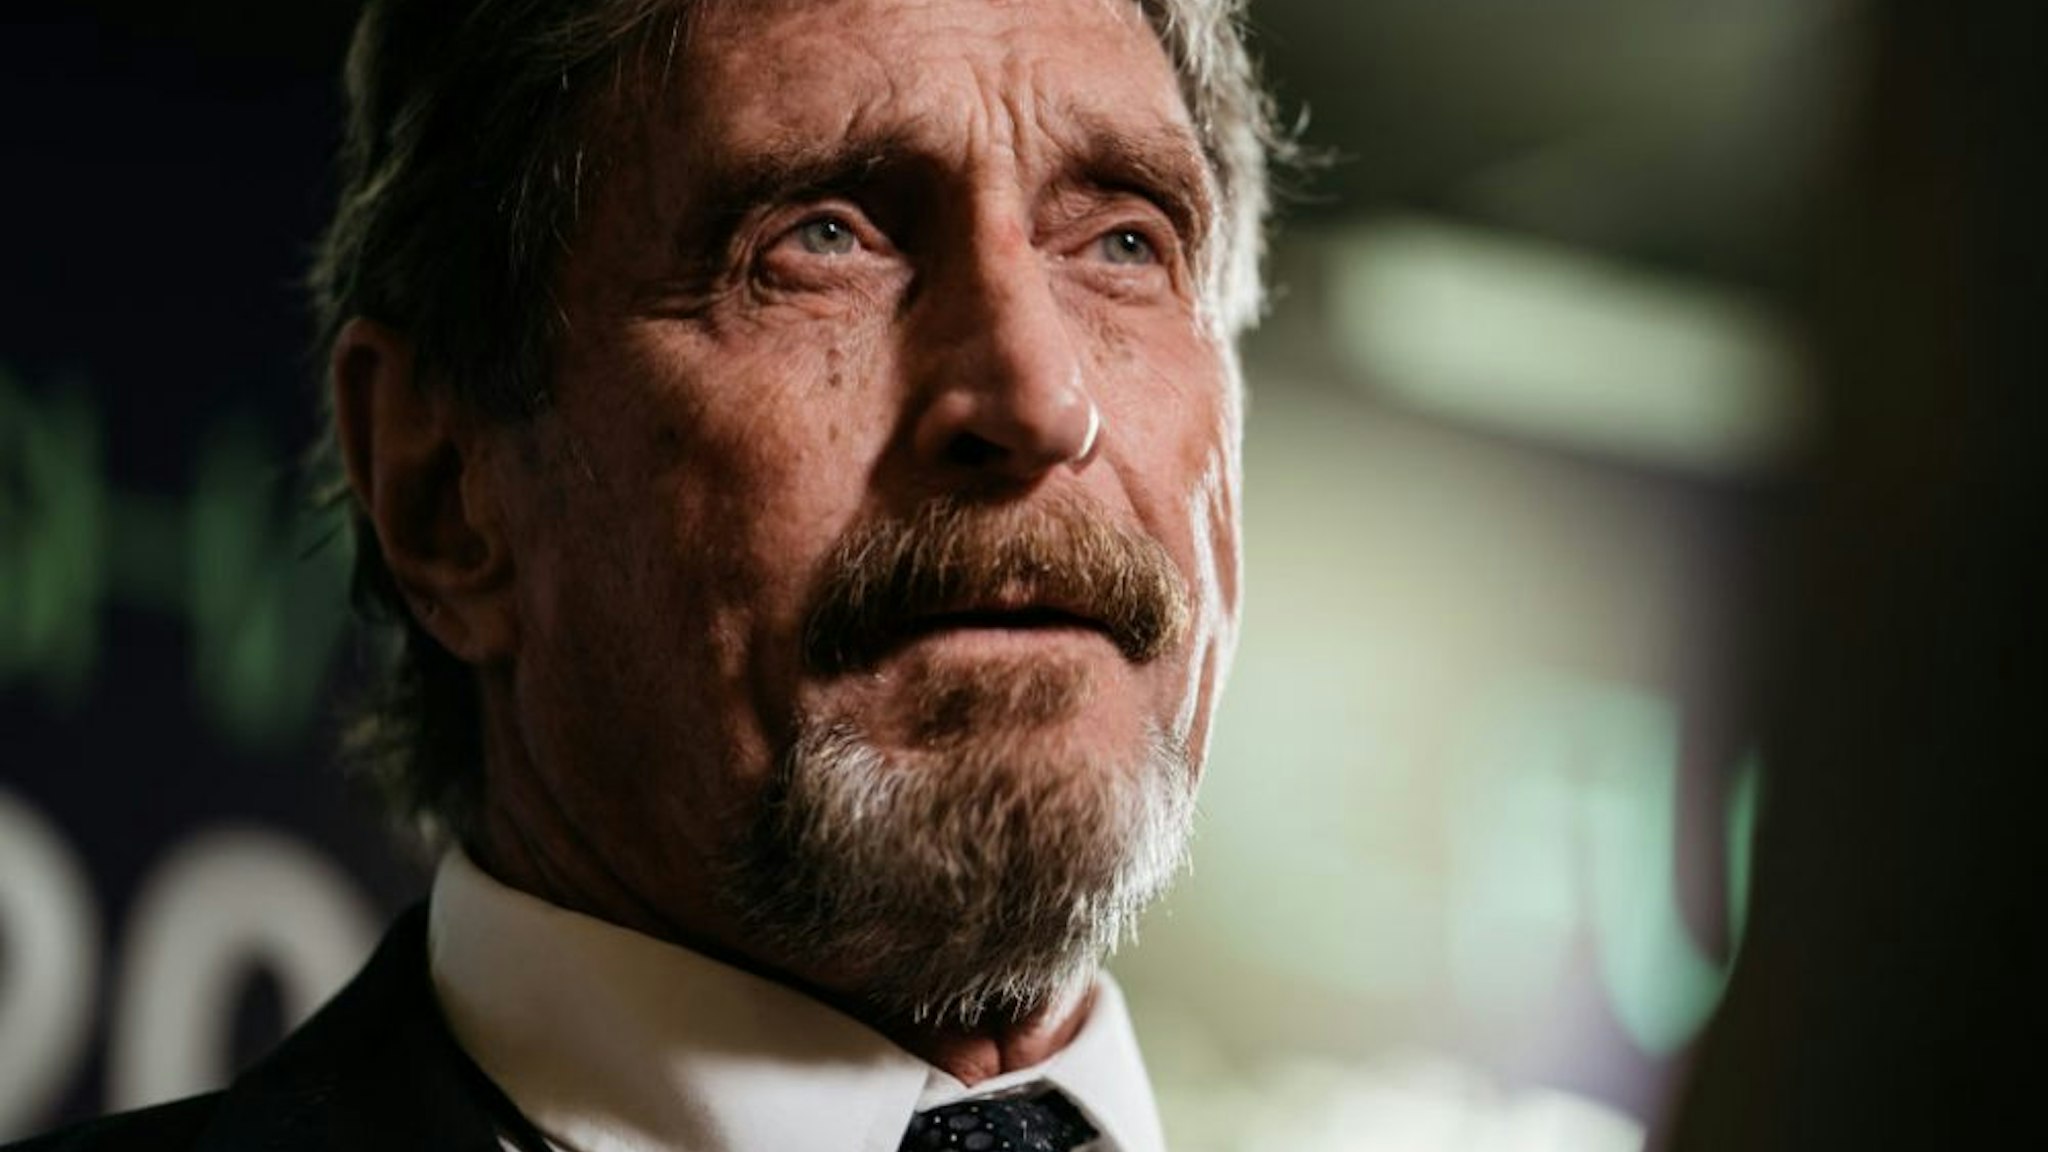 John McAfee, founder of McAfee Associates Inc. and chief cybersecurity visionary at MGT Capital Investments Inc., speaks during a Bloomberg Television interview on the sidelines of the Shape the Future: Blockchain Global Summit in Hong Kong, China, on Wednesday, Sept. 20, 2017. McAfee, who now runs a bitcoin mining company, says China's banning of initial coin offerings won't halt the momentum of cryptocurrencies globally.